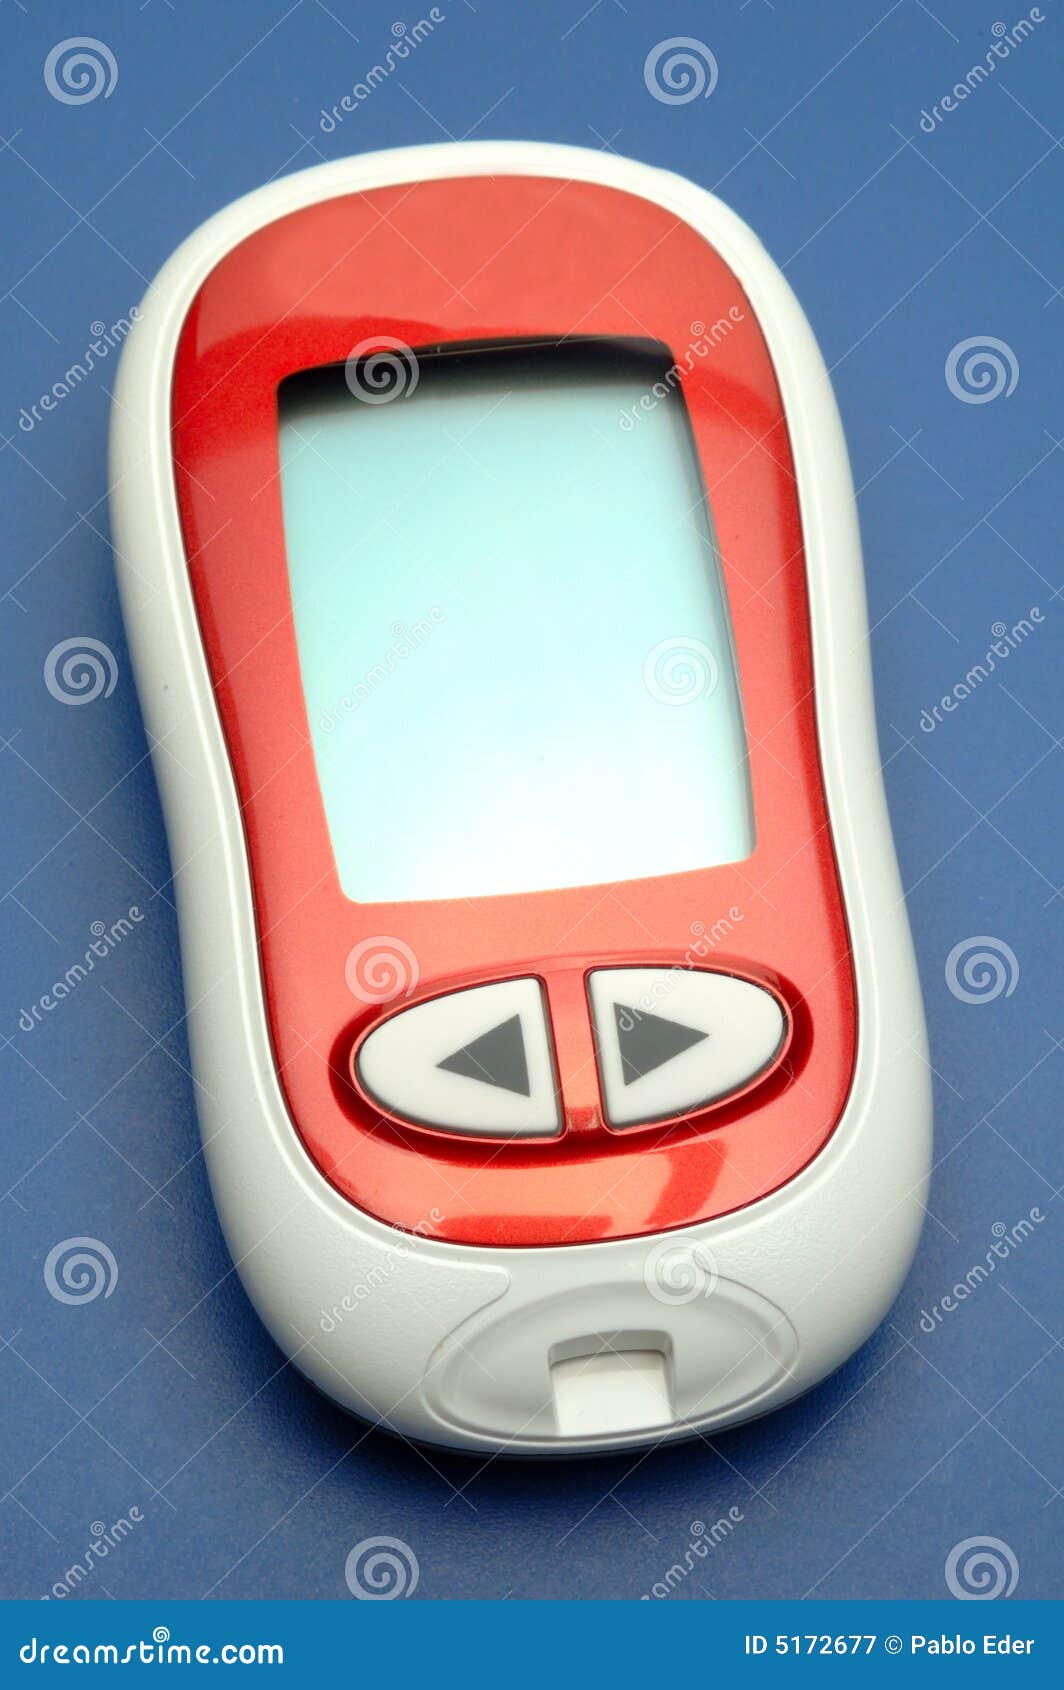 clipart blood glucose monitor - photo #39